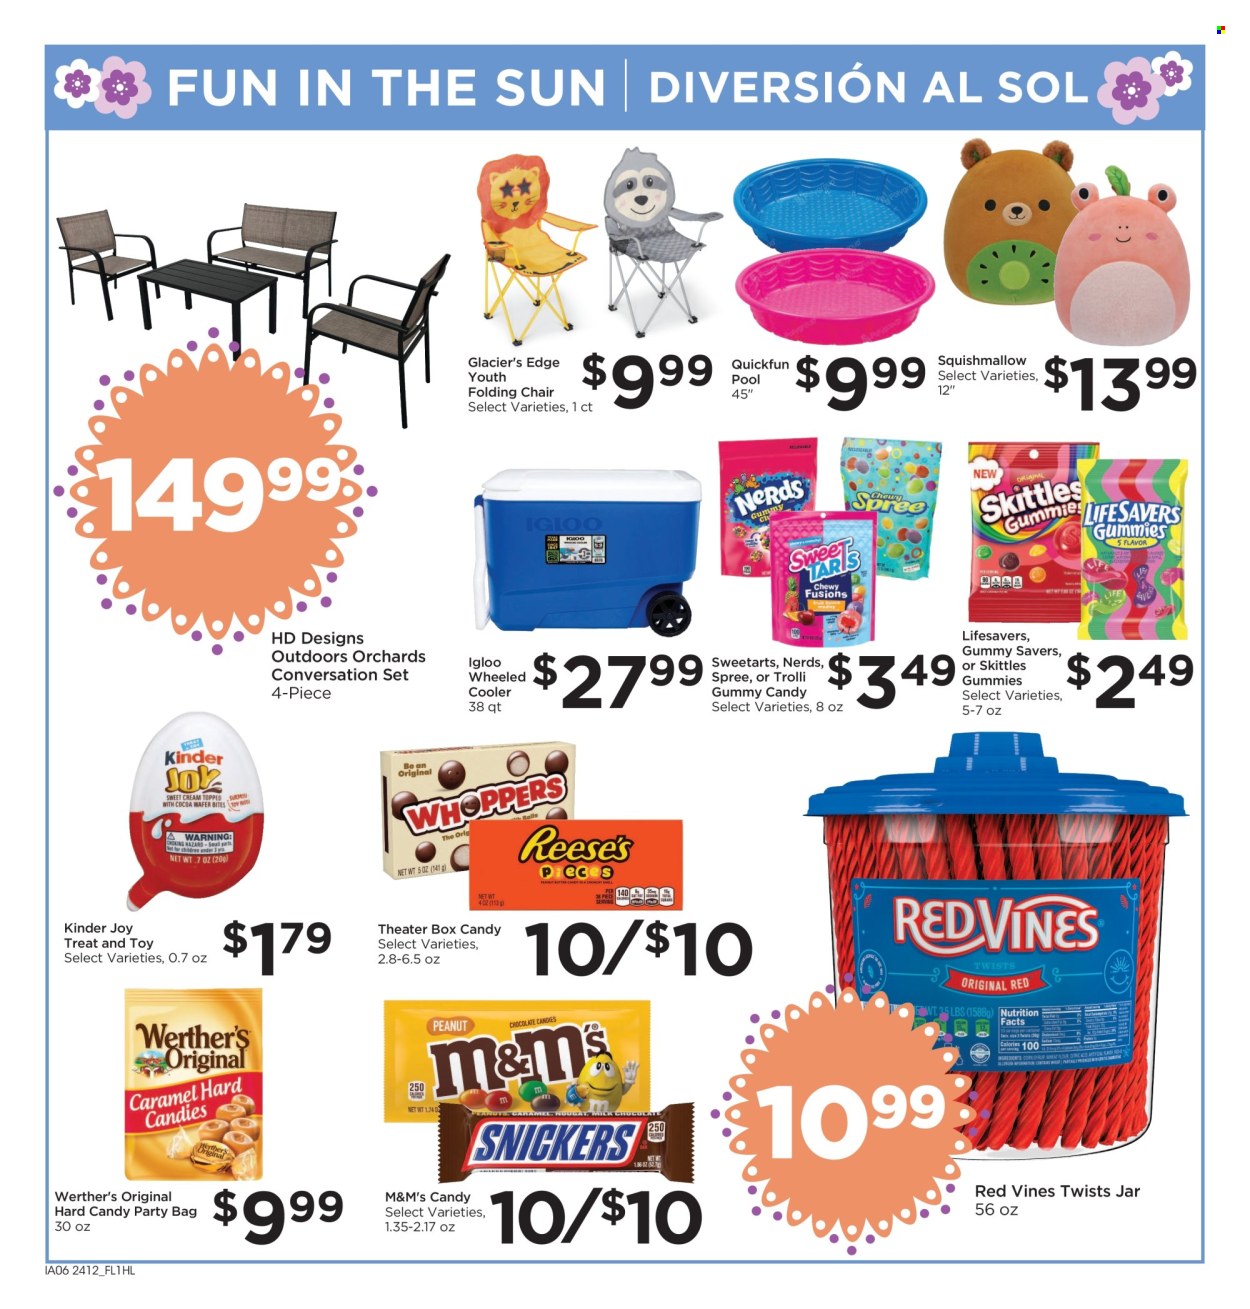 Foods Co ad  - 04.24.2024 - 04.30.2024.